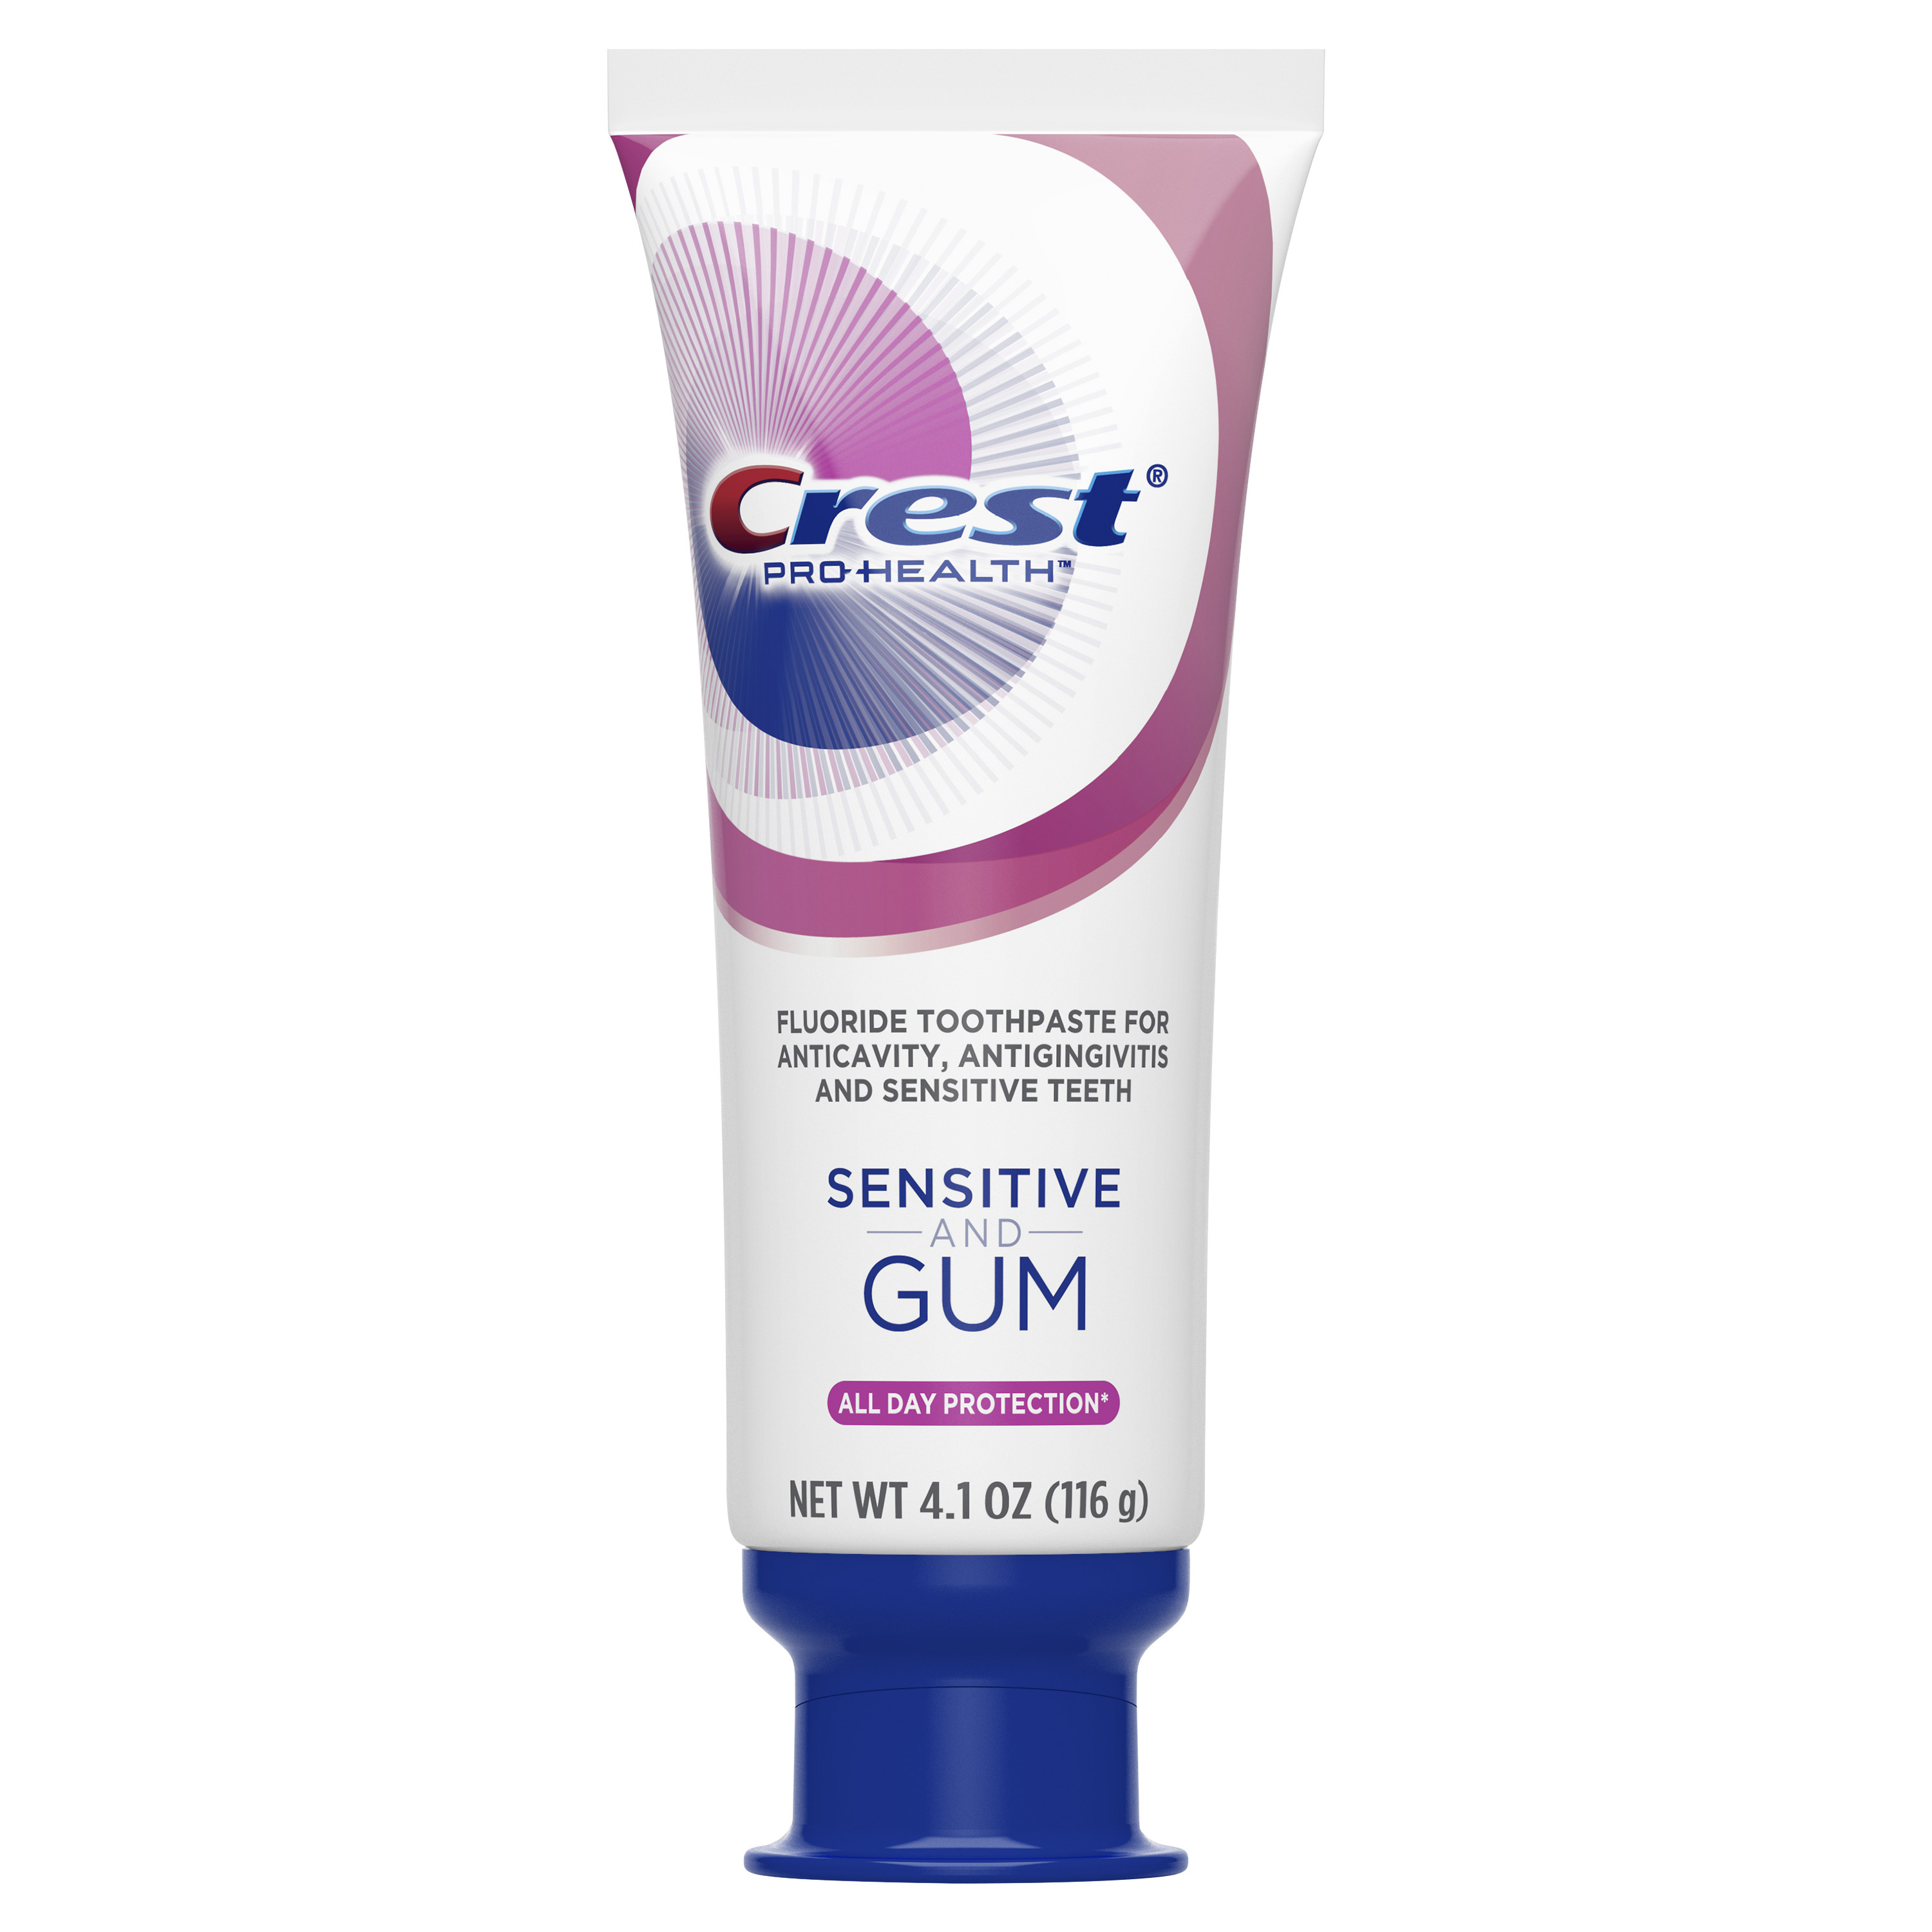 Crest Sensitive & Gum All Day Protection Anticavity Fluoride Toothpaste, 4.1 oz - image 2 of 13